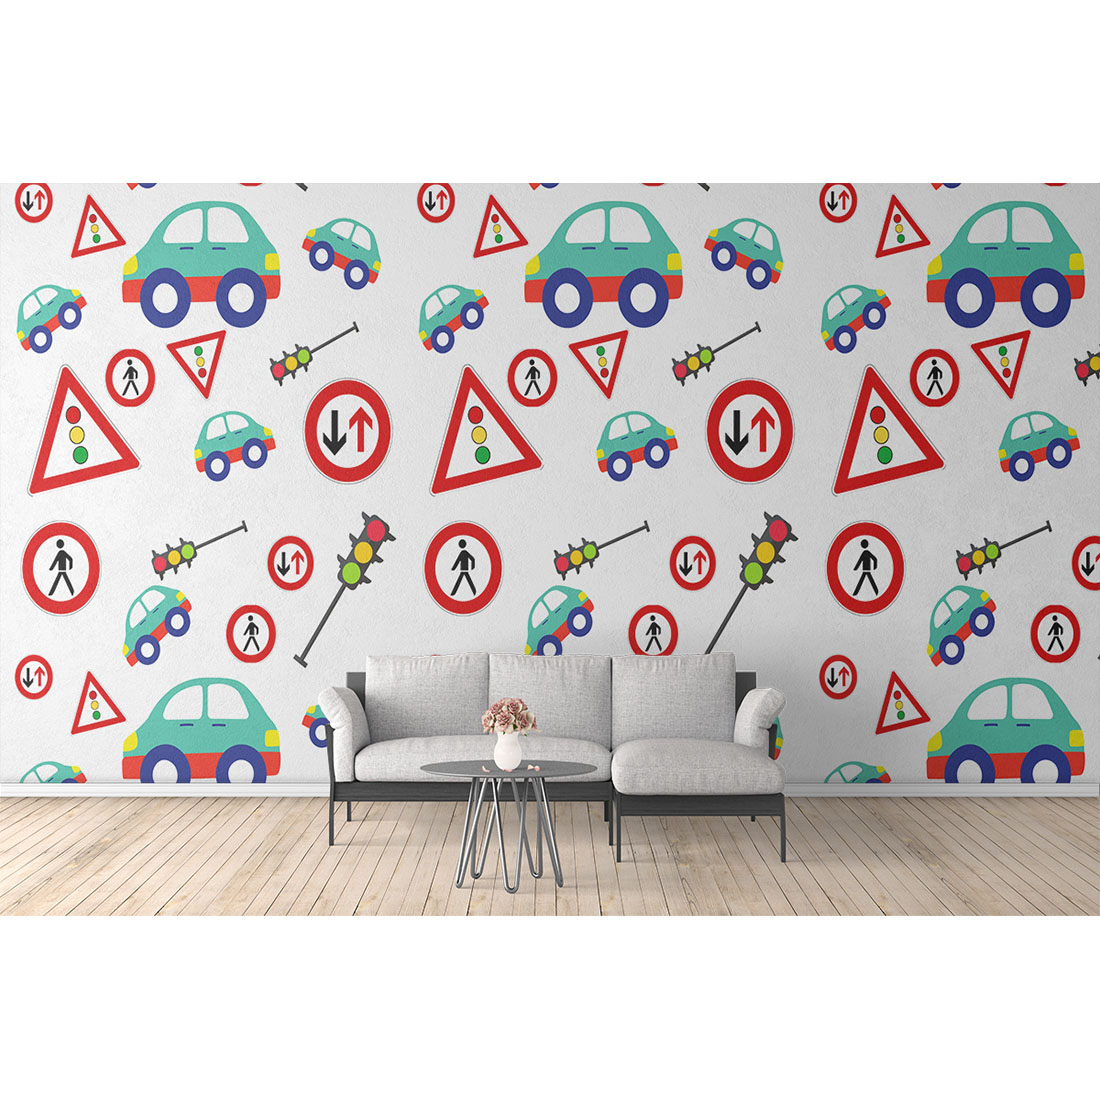 Cool wallpaper with cars and traffic symbols.